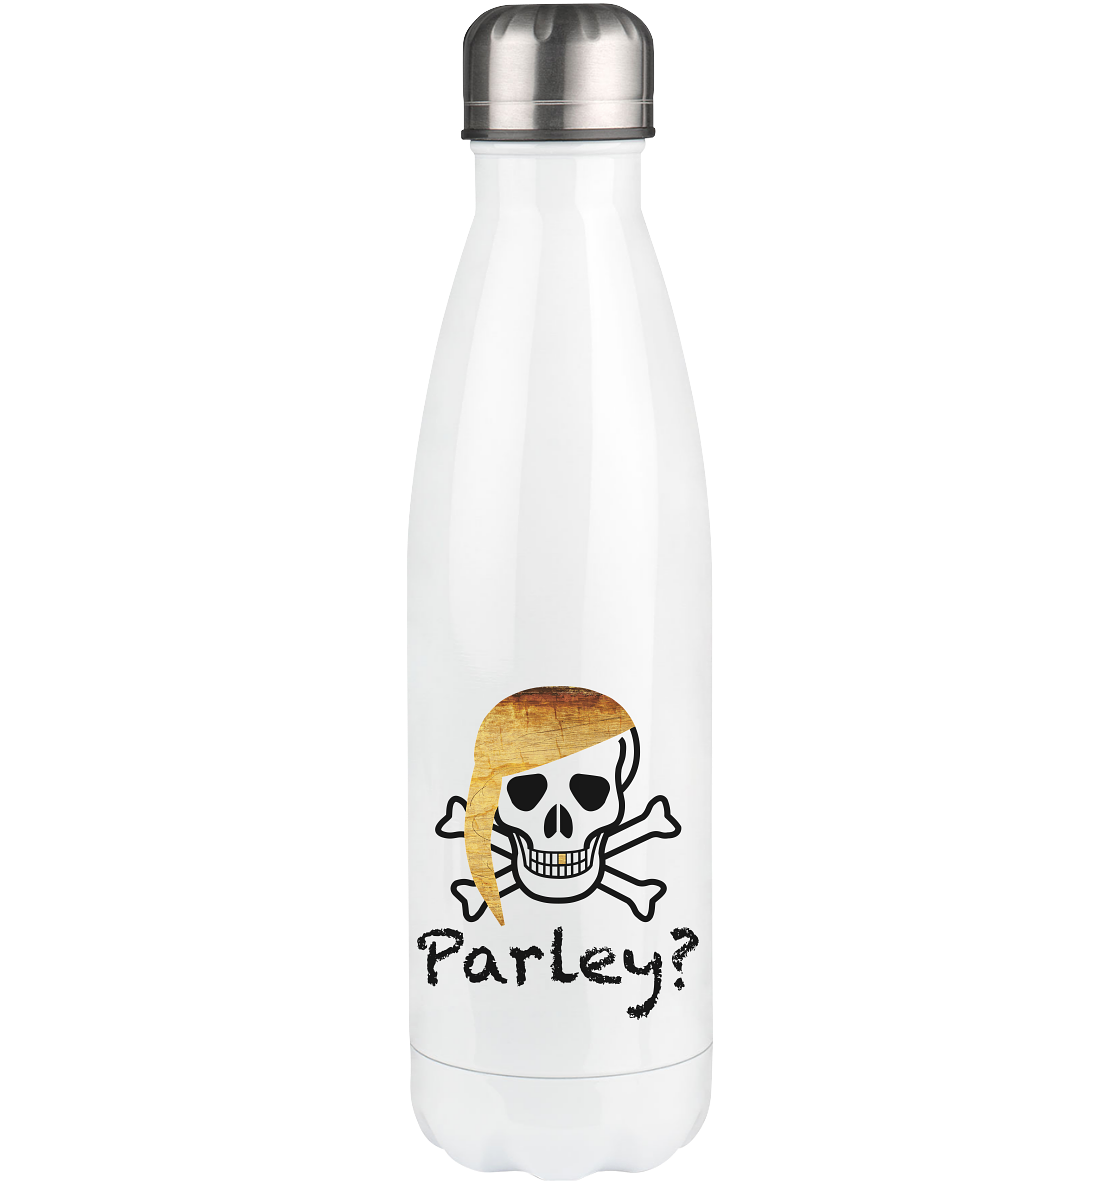 Parley? - Thermoflasche 500ml